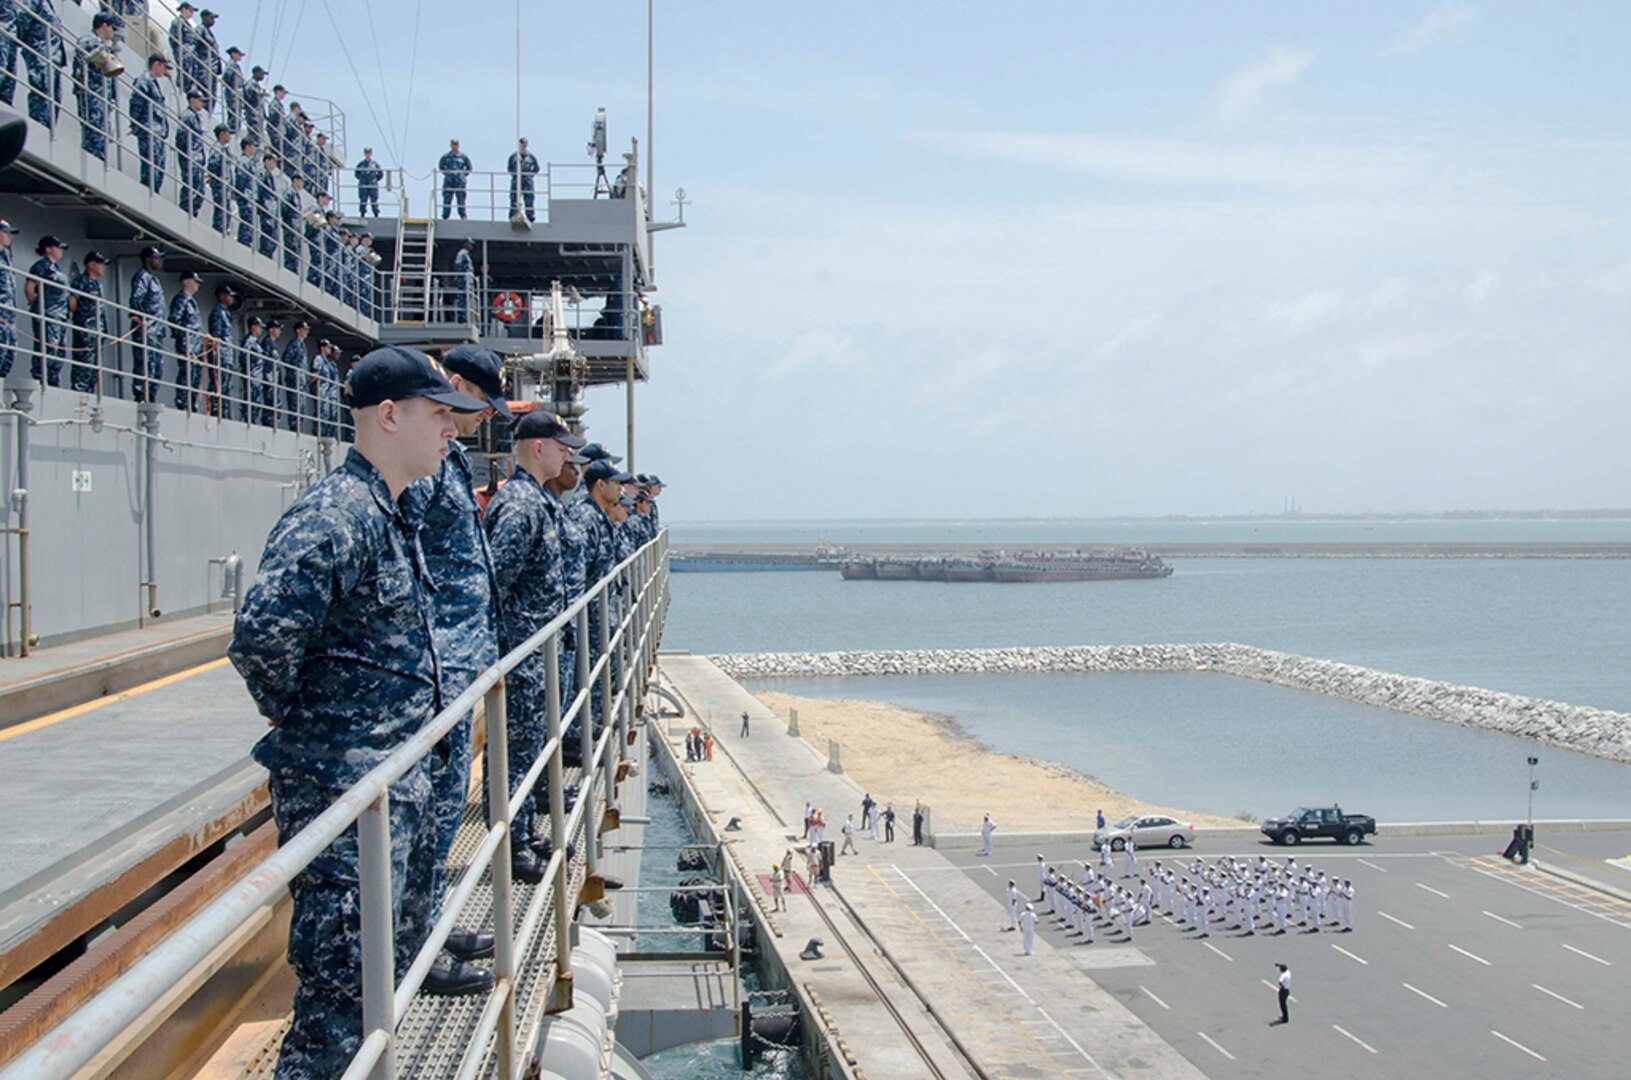 Sailors assigned to the submarine tender USS Frank Cable (AS 40), man the rails while pulling into Colombo, Sri Lanka. The visit is aimed at building friendship and goodwill between the U.S. and the people of Sri Lanka, Aug. 29, 2016. Frank Cable is one of two forward-deployed submarine tenders and is on a scheduled deployment in the U.S. 7th Fleet area of operations to conduct maintenance and support of deployed U.S. naval force submarines and surface vessels in the Indo-Asia-Pacific region. 